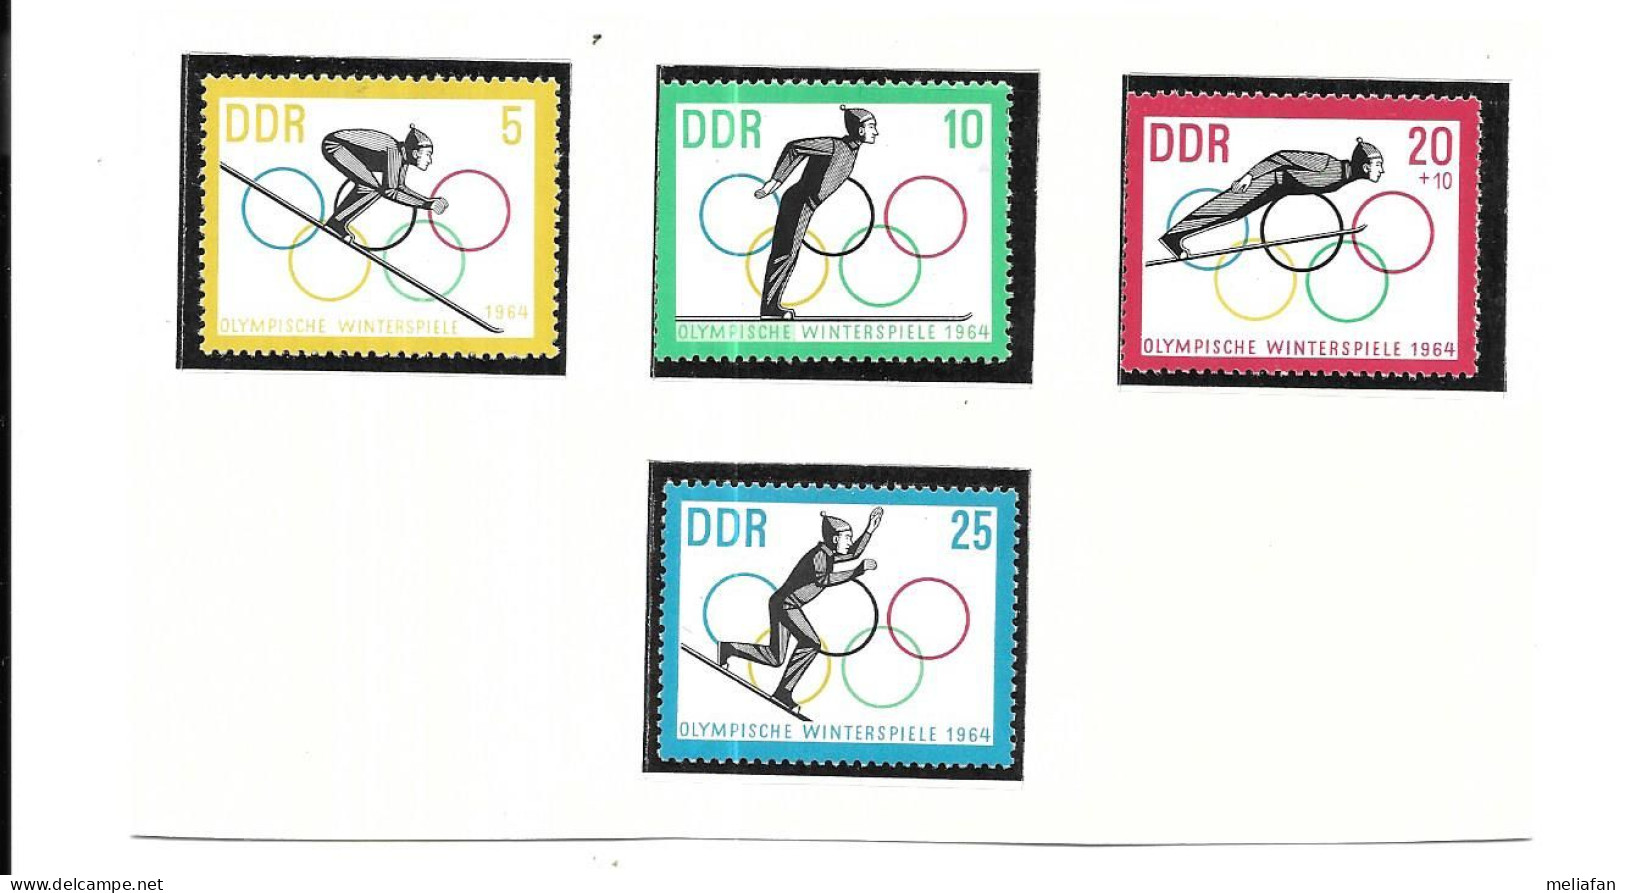 DF72 - TIMBRES POSTE DDR - JEUX OLYMPIQUES 1964 - SAUT A SKI - Inverno1964: Innsbruck